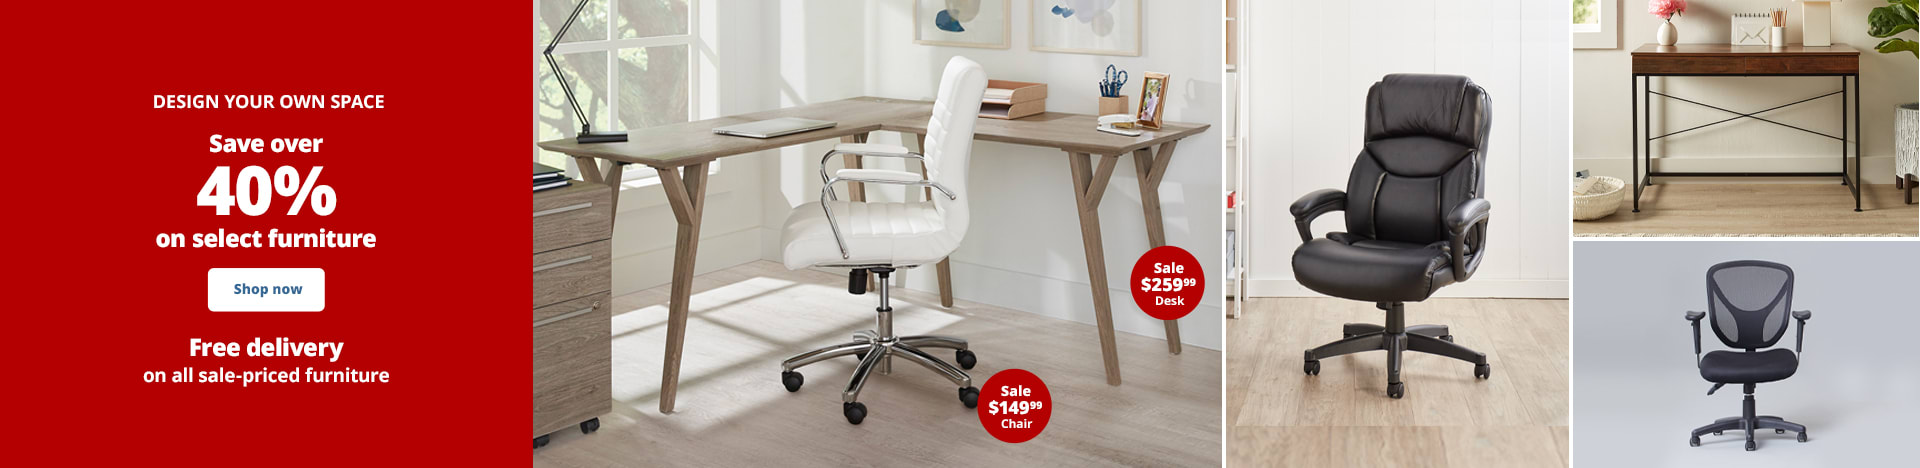 Save over 40% on select furniture | Free delivery on all sale-priced furniture